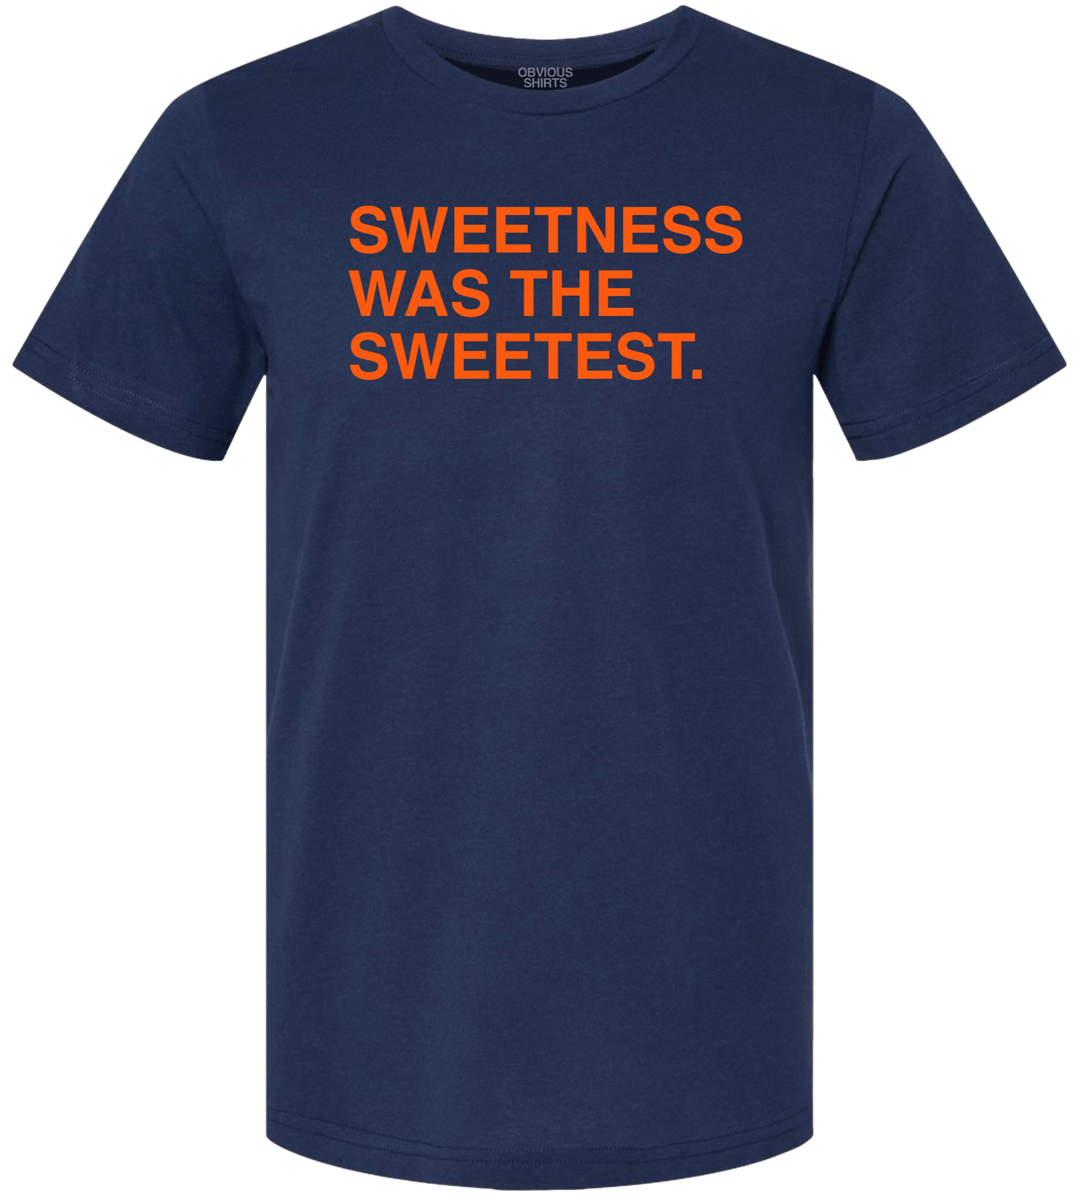 SWEETNESS WAS THE SWEETEST. - OBVIOUS SHIRTS